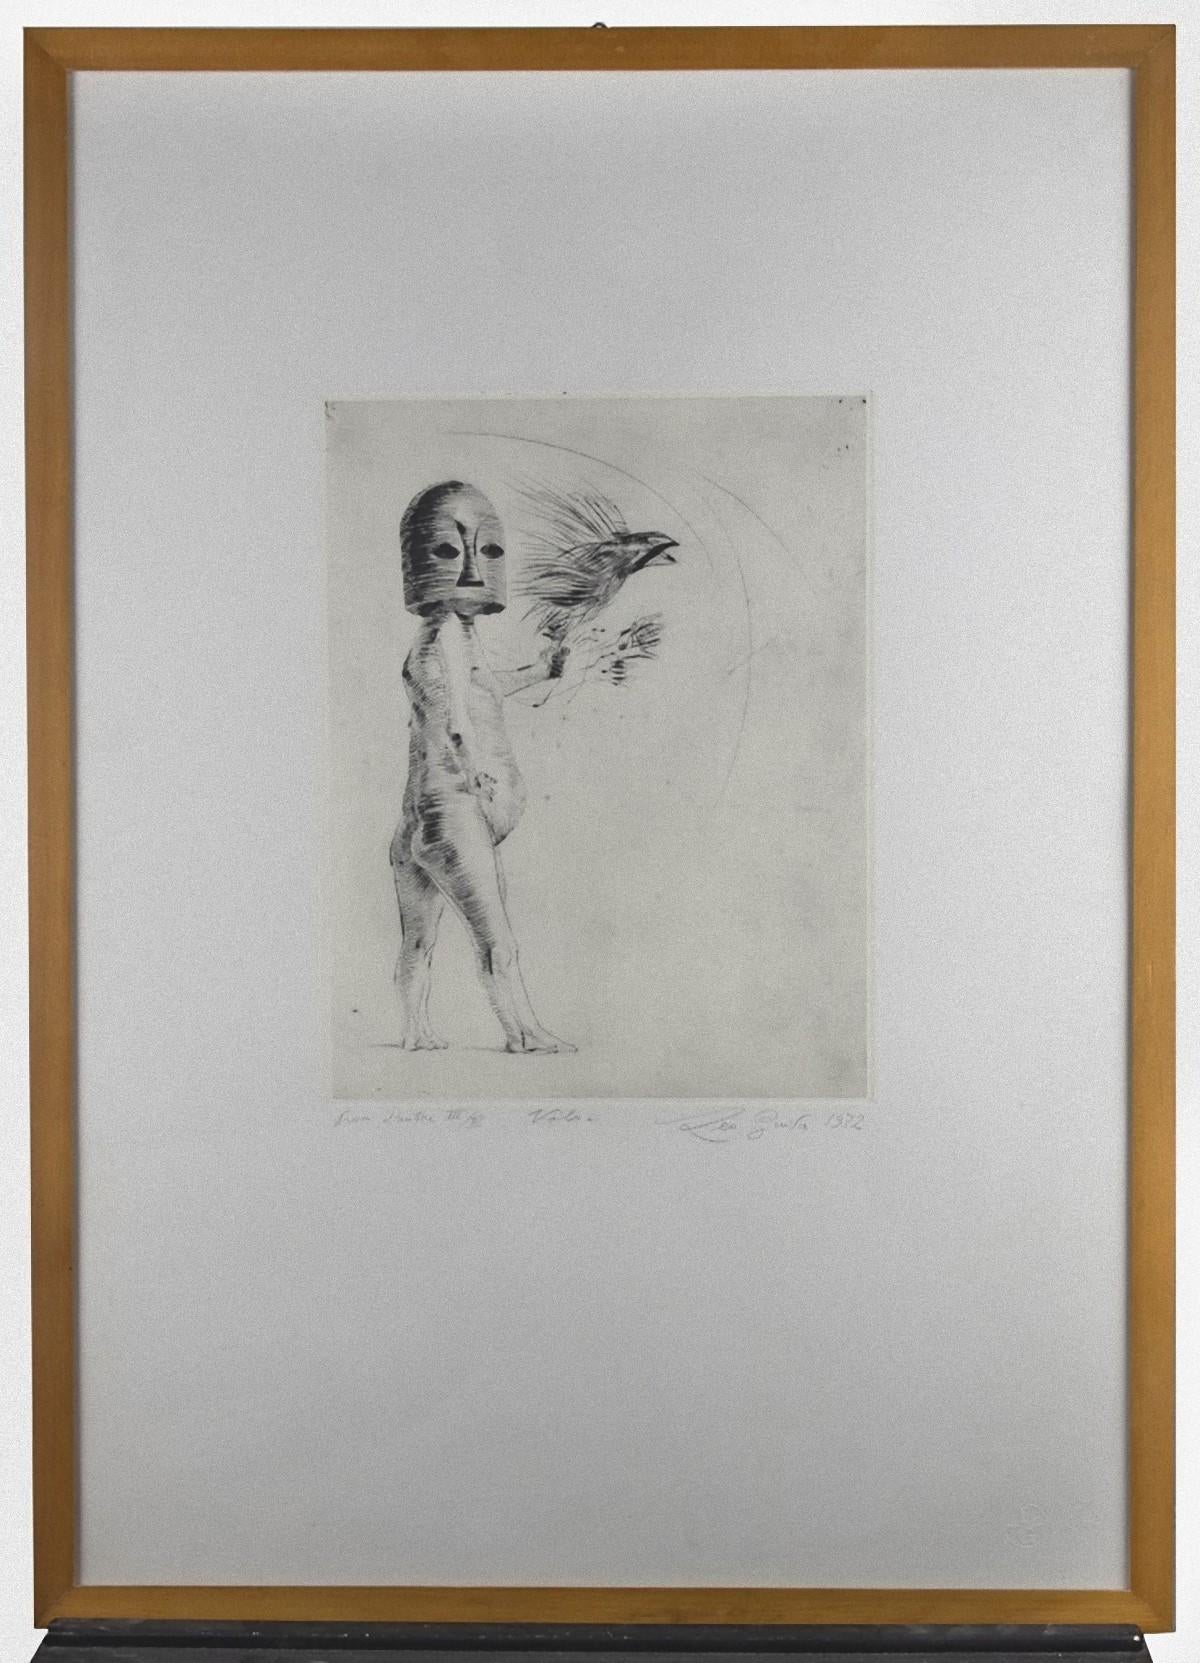 Vola is an original Contemporary artwork realized in 1972 by the italian artist Leo Guida (1992 - 2017).

Original Etching and Drypoint.

Hand-signed, dated, numbered on the lower margin in pencil by the artist: Prova d'autore III/III "Vola" Leo